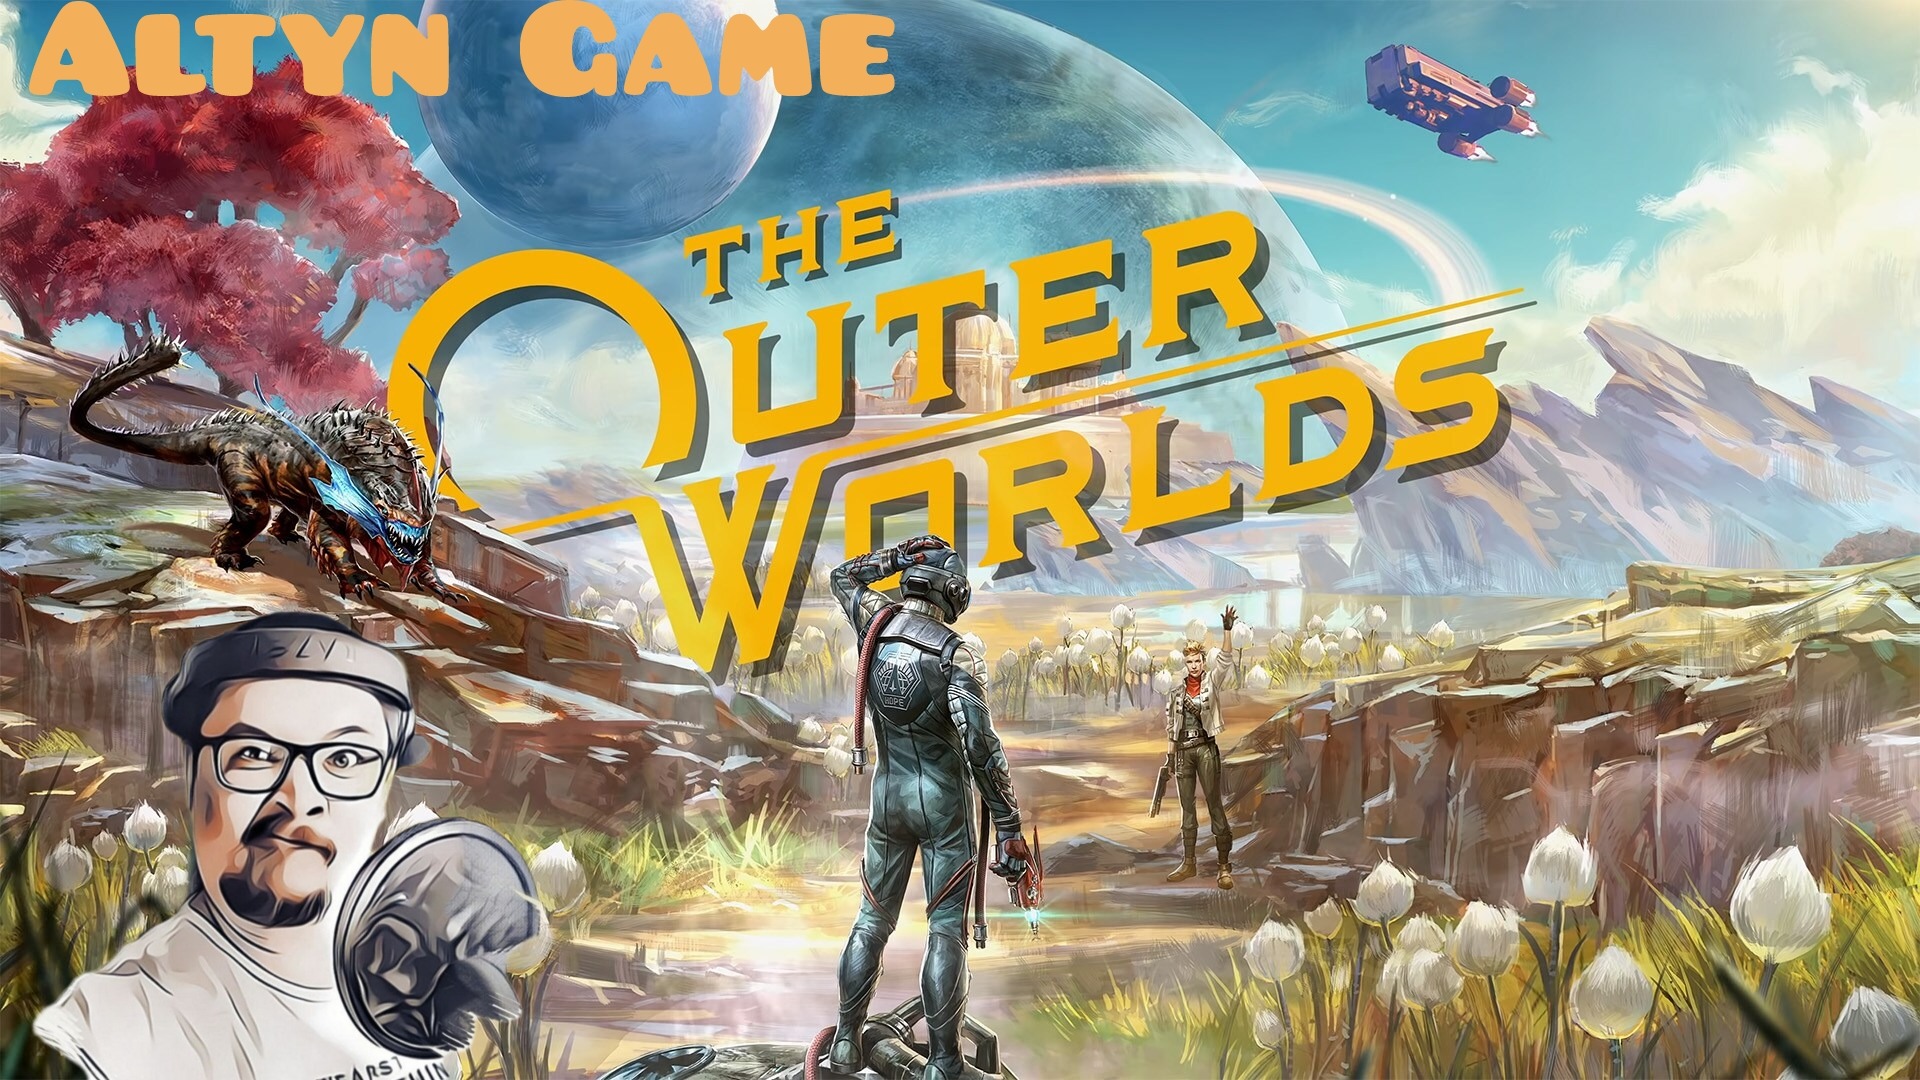 Начало ворлд. The Outer Worlds начало. The Outer Worlds.